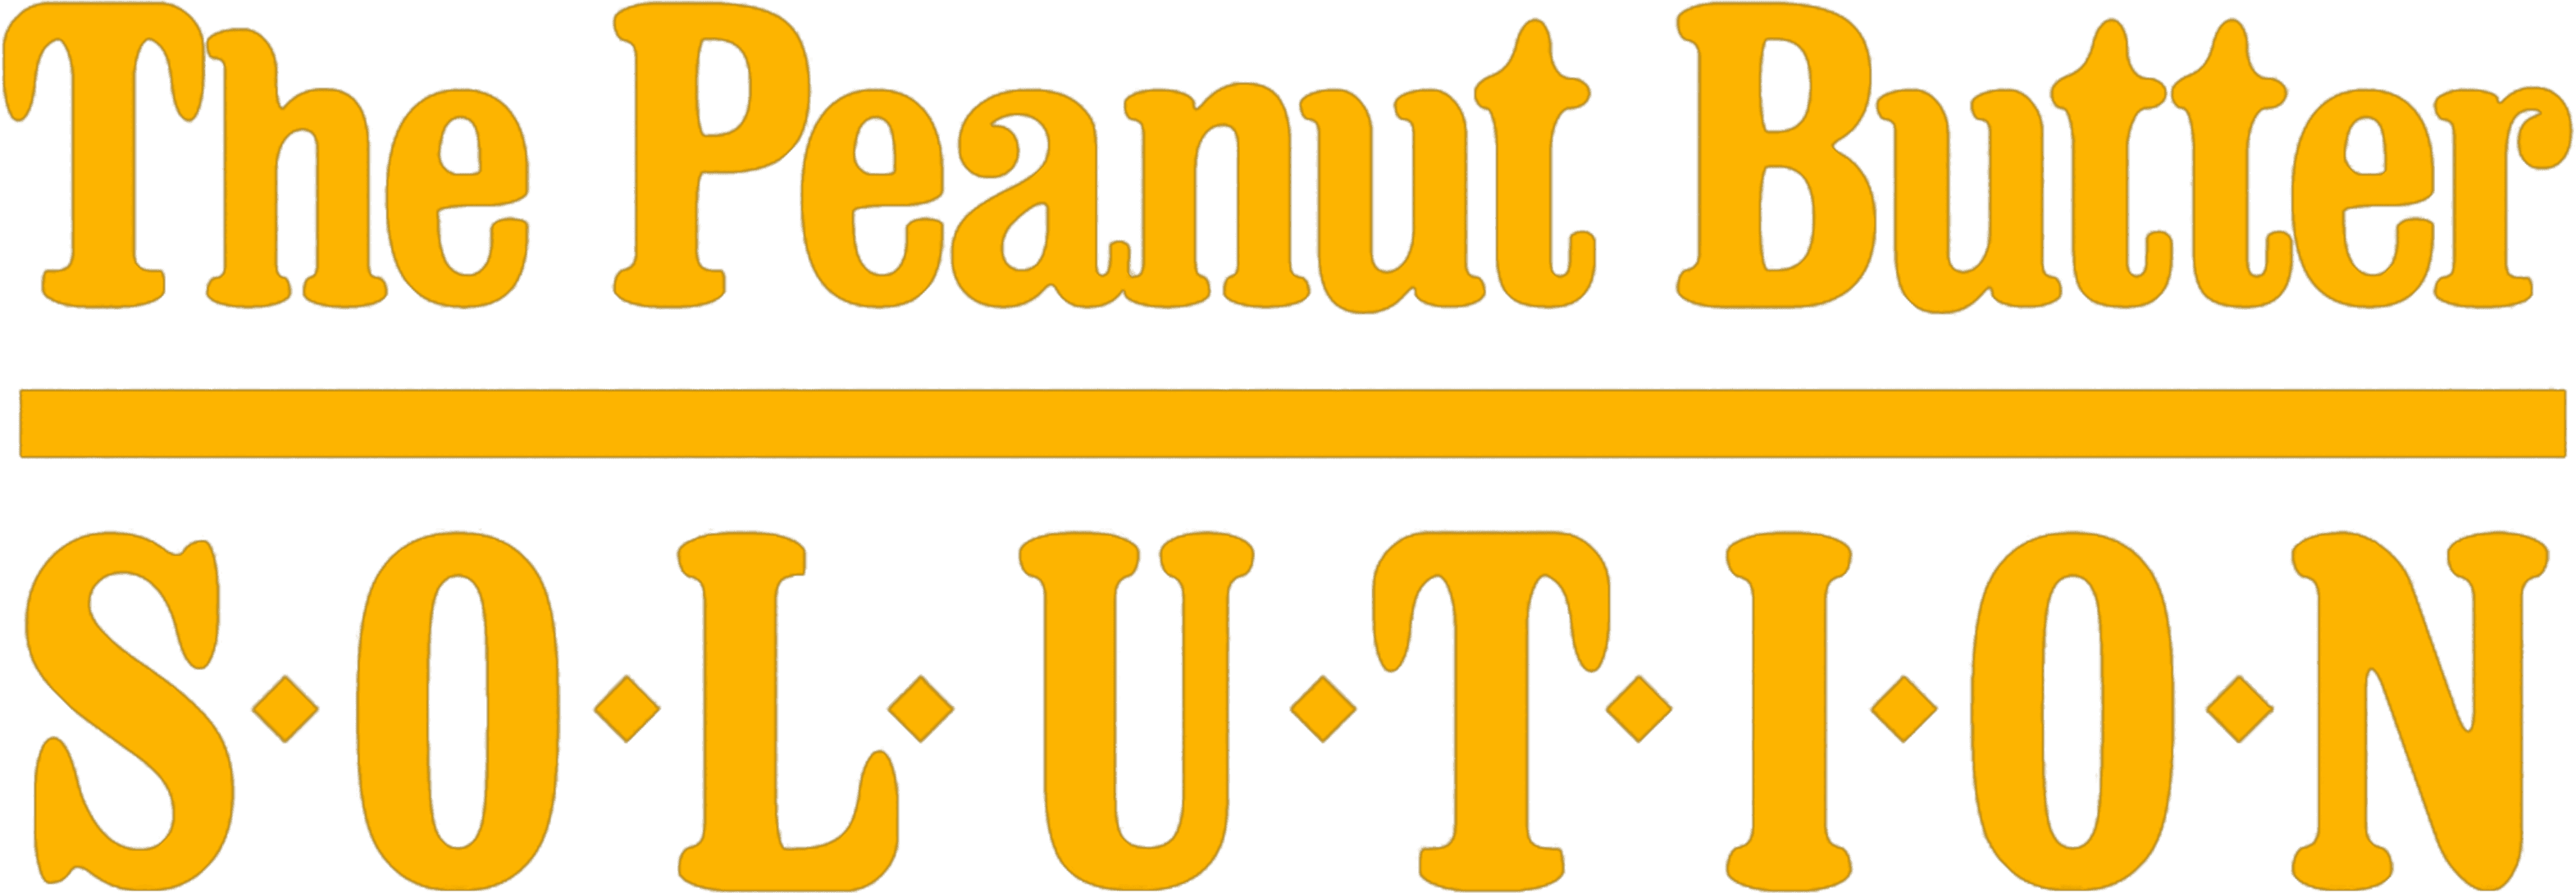 The Peanut Butter Solution logo